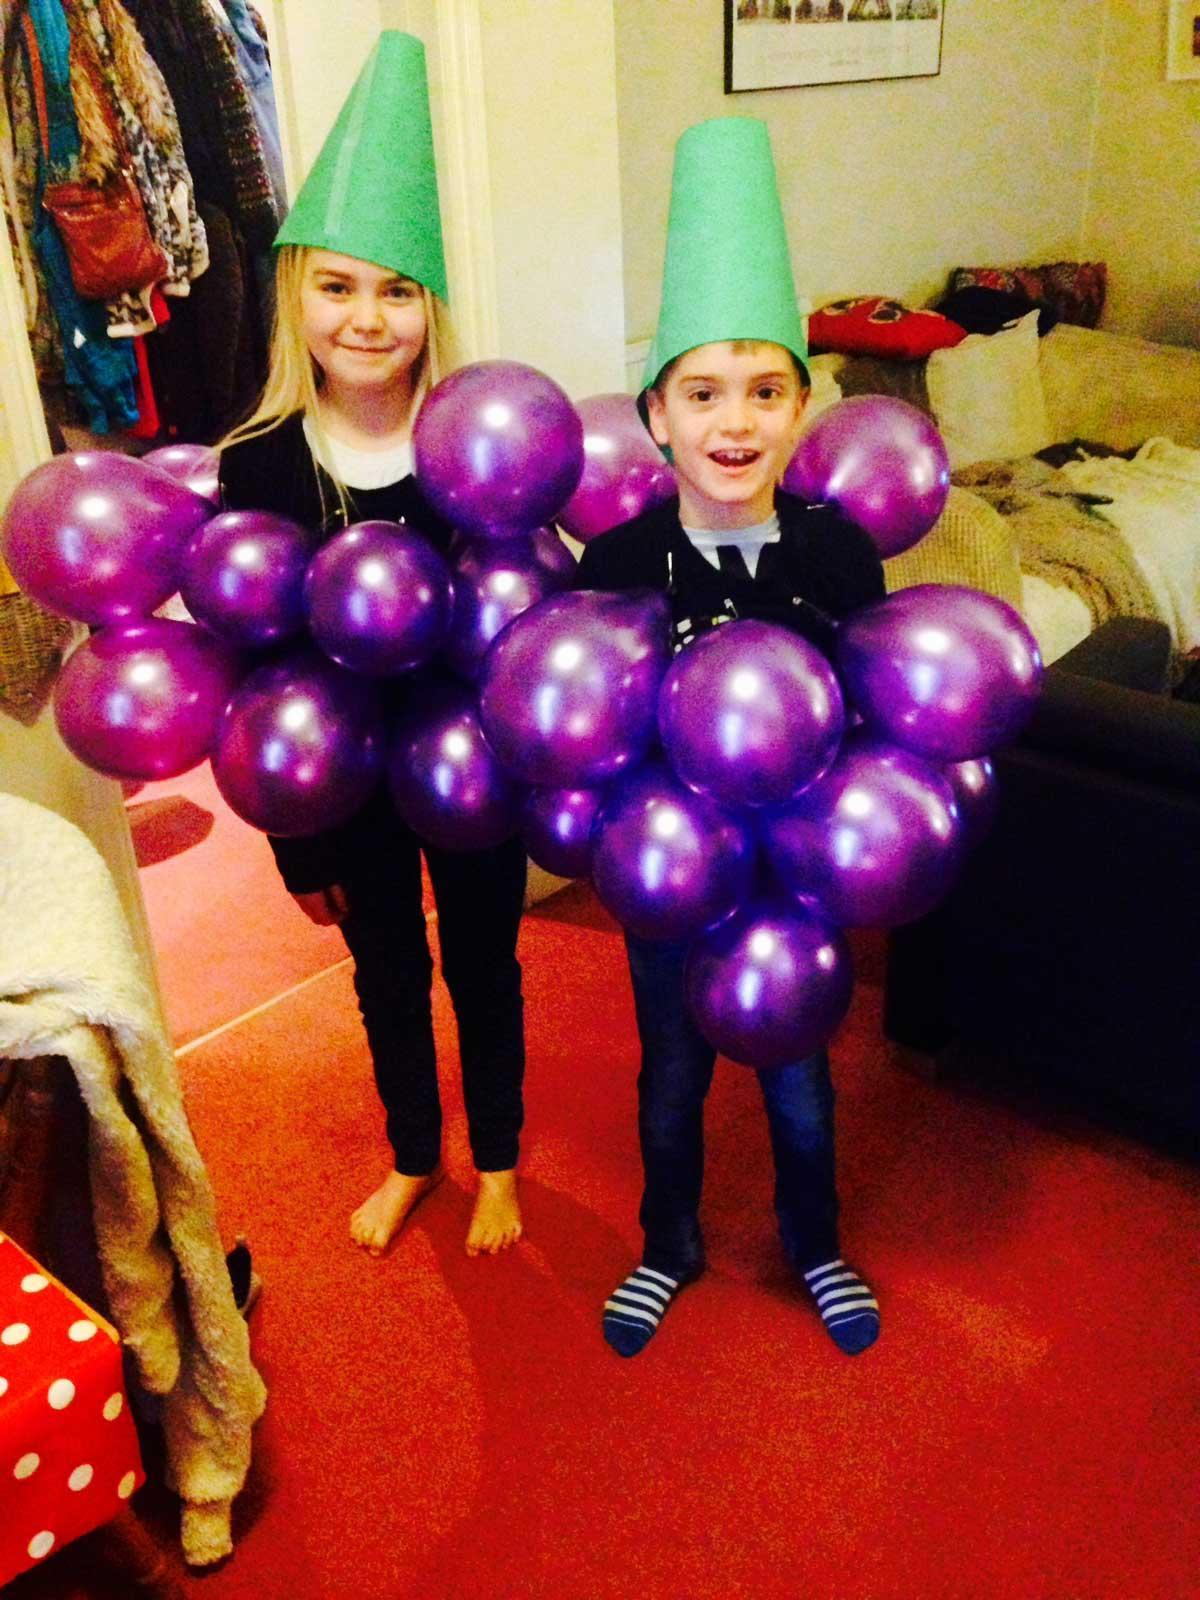 Lola and Louie dressed as grapes for Comic Relief